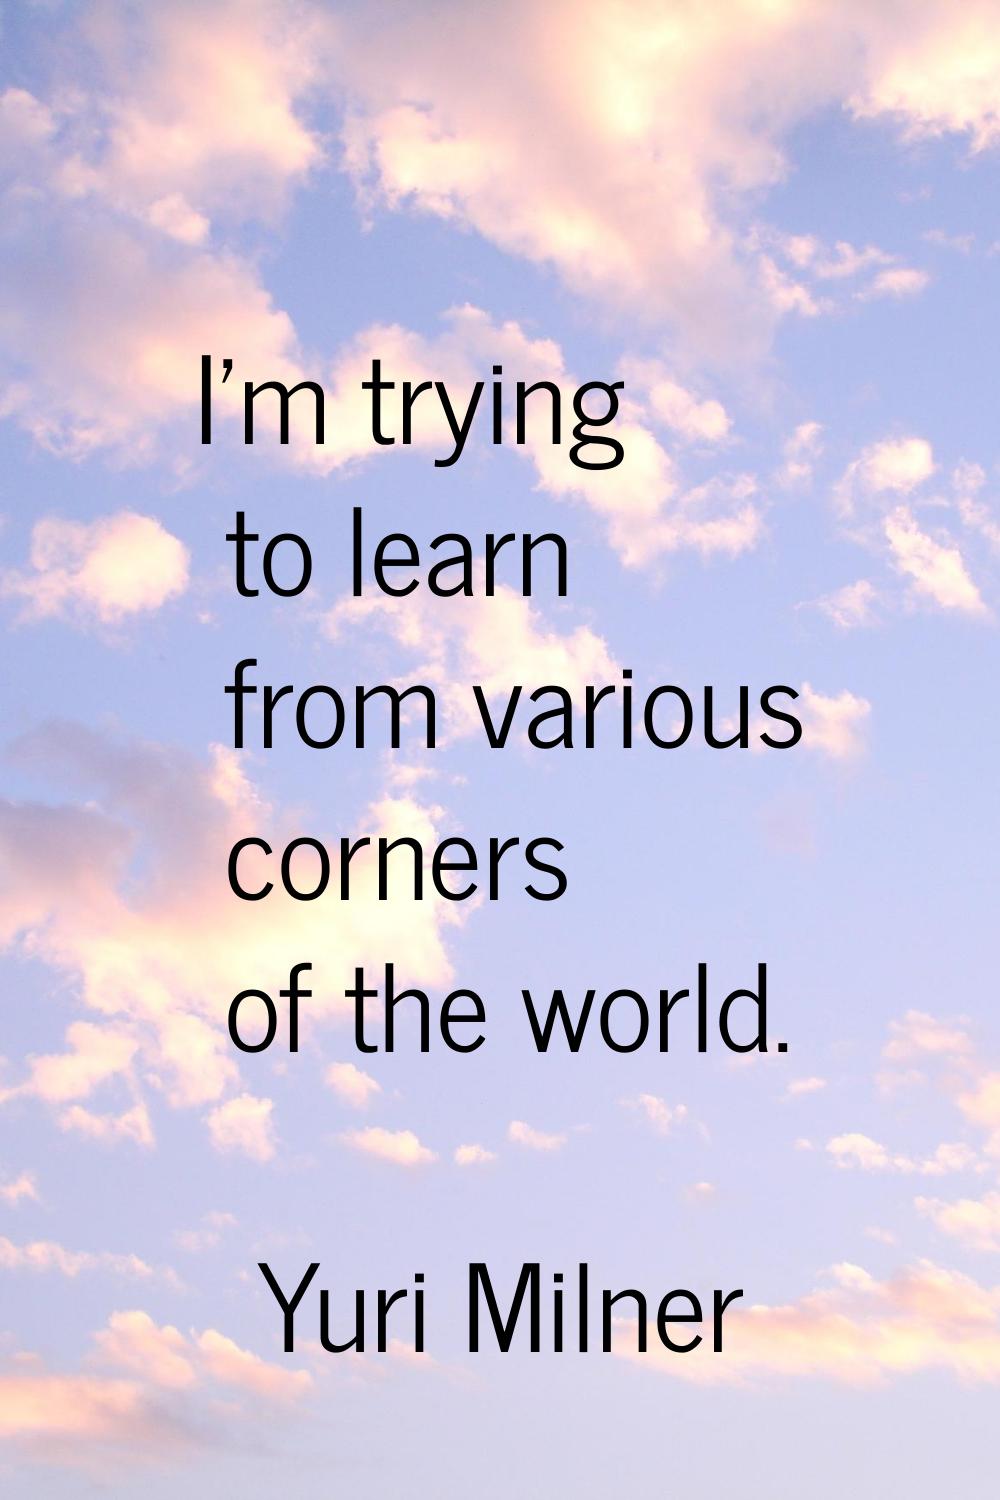 I'm trying to learn from various corners of the world.